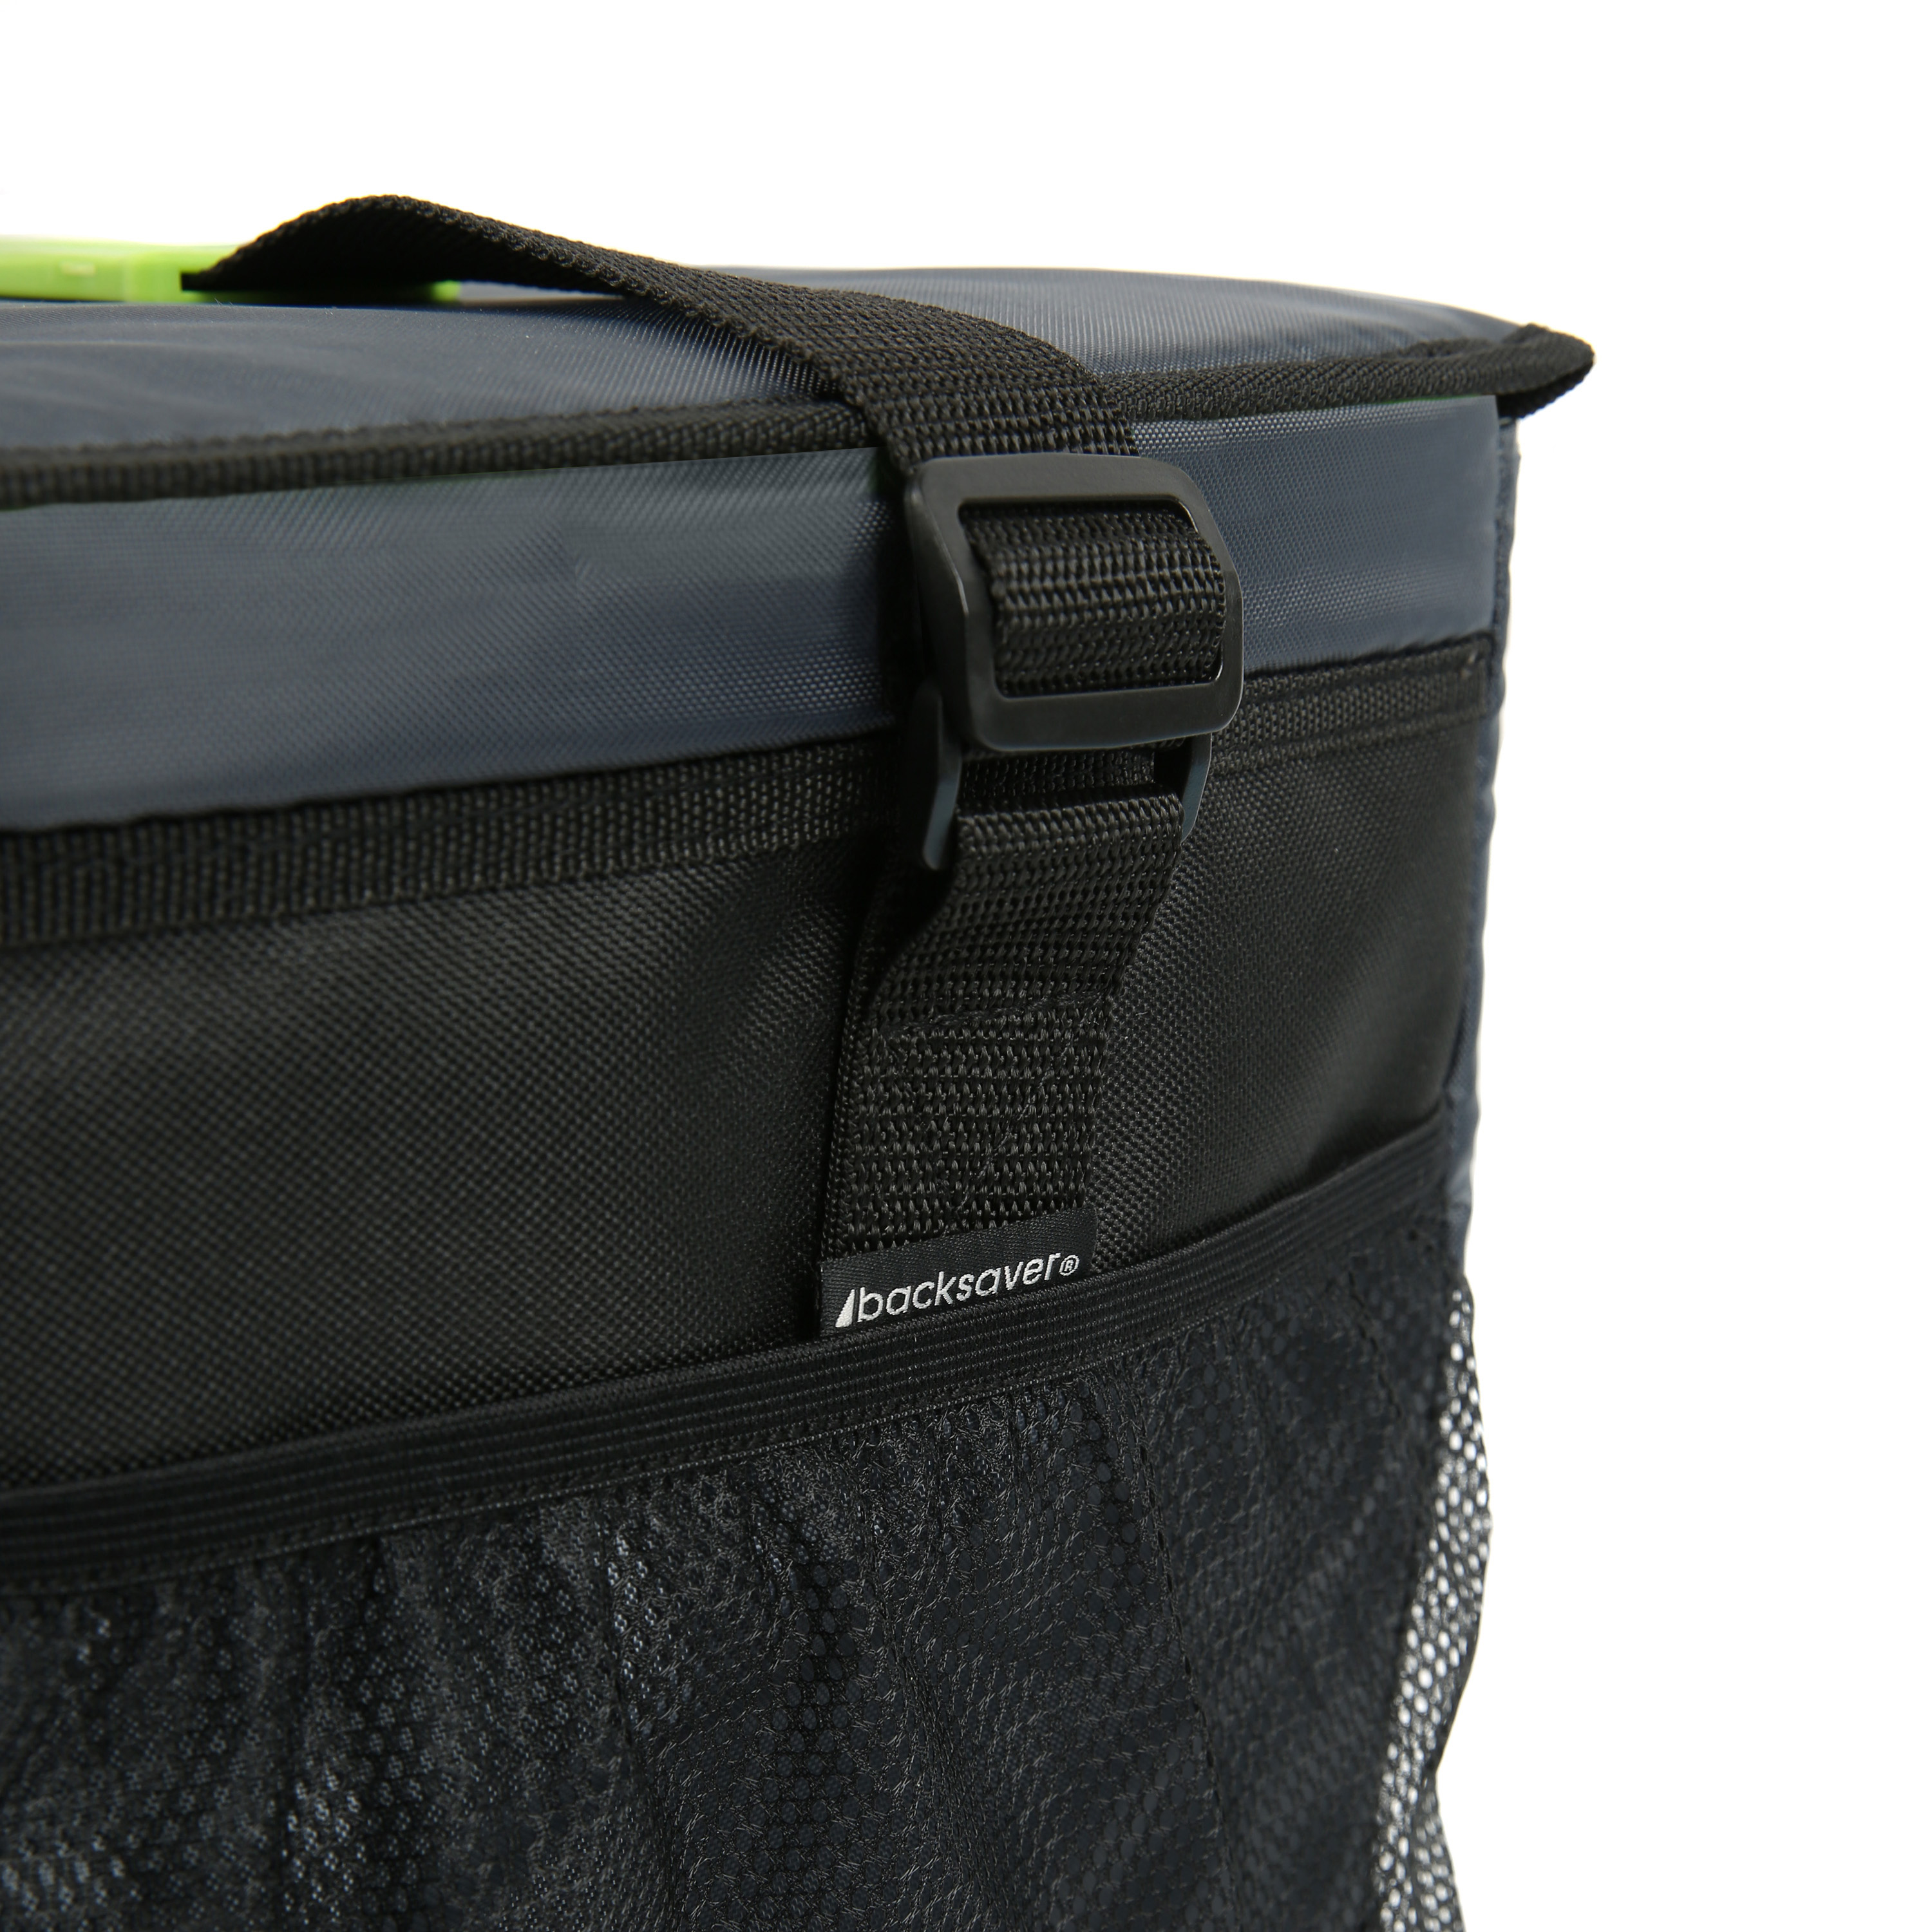 Arctic Zone 30 cans Zipperless Soft Sided Cooler with Hard Liner, Black and Green - image 5 of 11